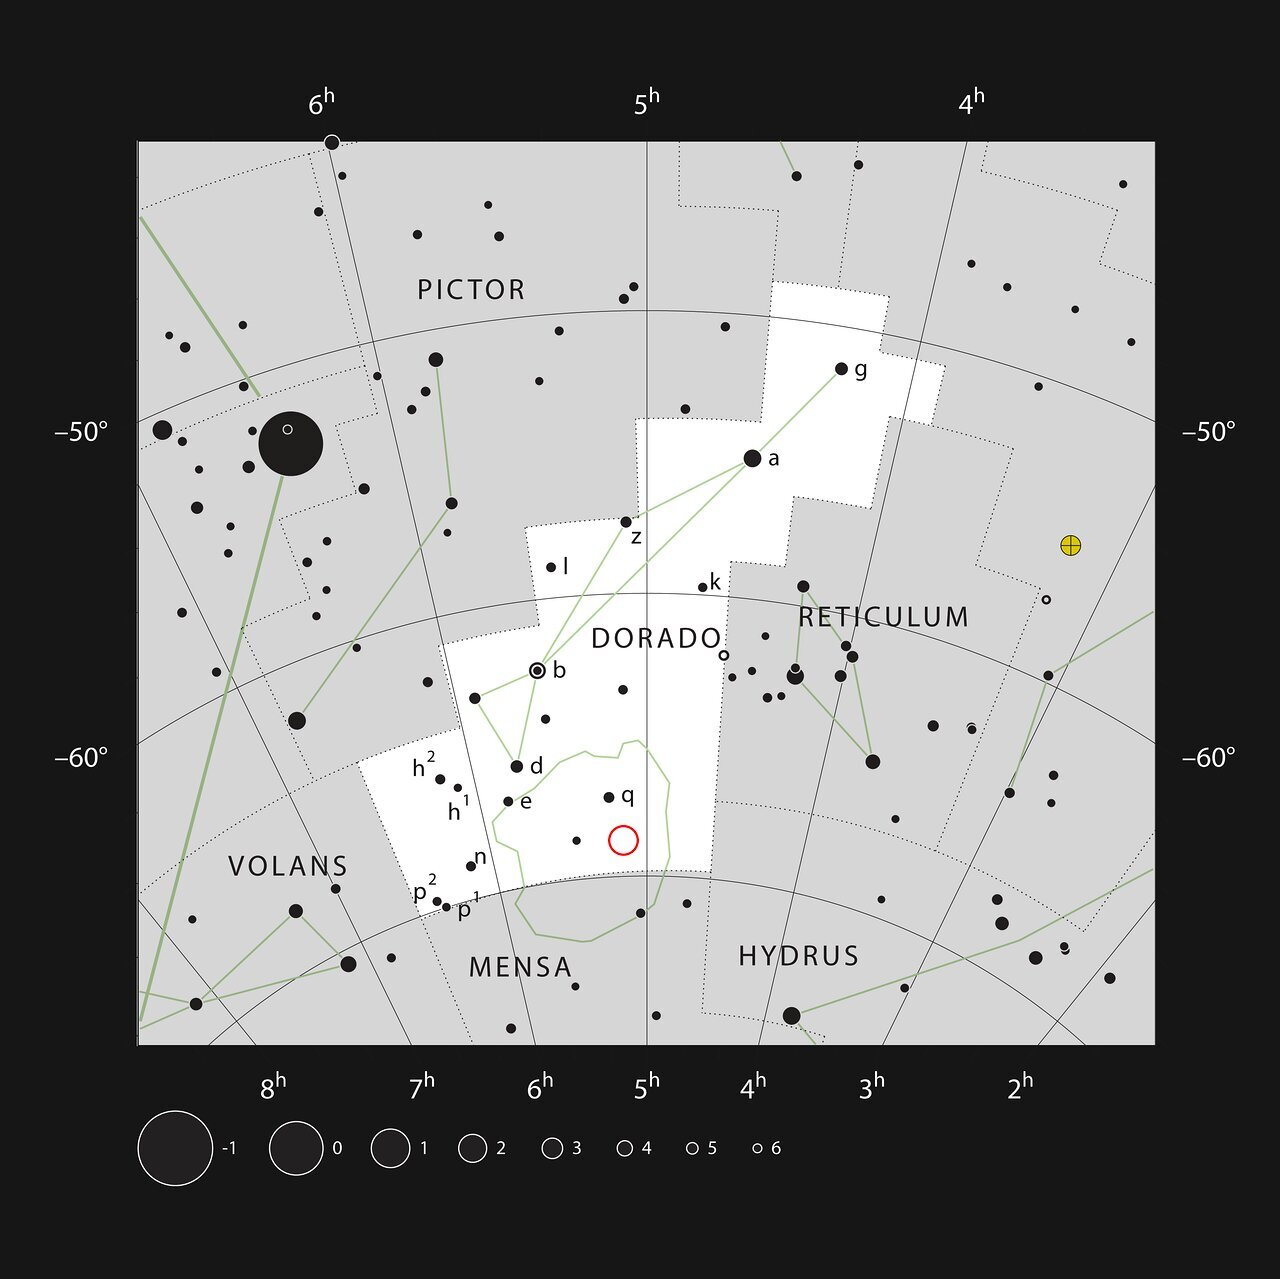 Location of the NGC 1850 cluster in the constellation Dorado shown in a chart mapping  the southern constellation Dorado and other stars in that region of the sky, most of which can be seen with the naked eye on a clear dark night. NGC 1850 — a cluster of thousands of stars roughly 160,000 light-years away in the Large Magellanic Cloud, a Milky Way neighbour — is marked with a red circle.